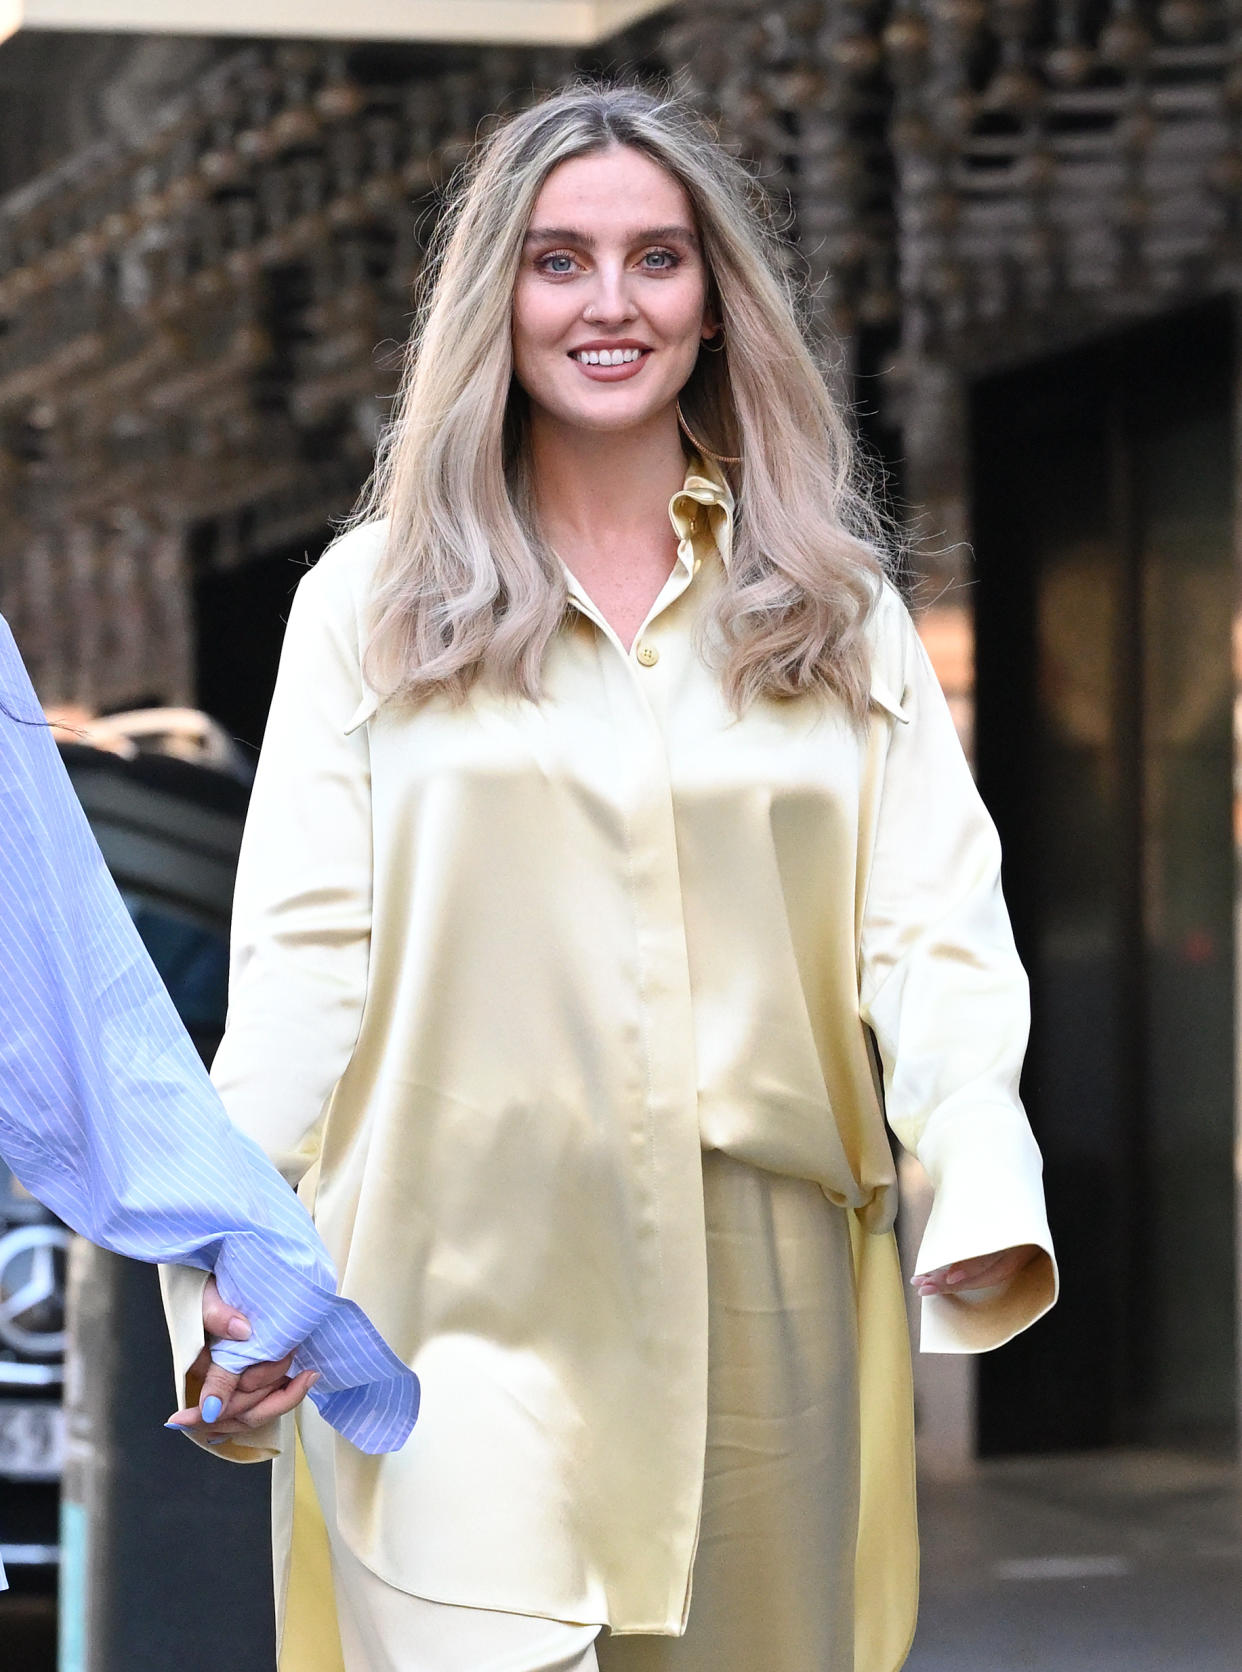 LONDON, ENGLAND - APRIL 30: Perrie Edwards of Little Mix arrives at Global radio studios on April 30, 2021 in London, England. (Photo by Karwai Tang/WireImage)